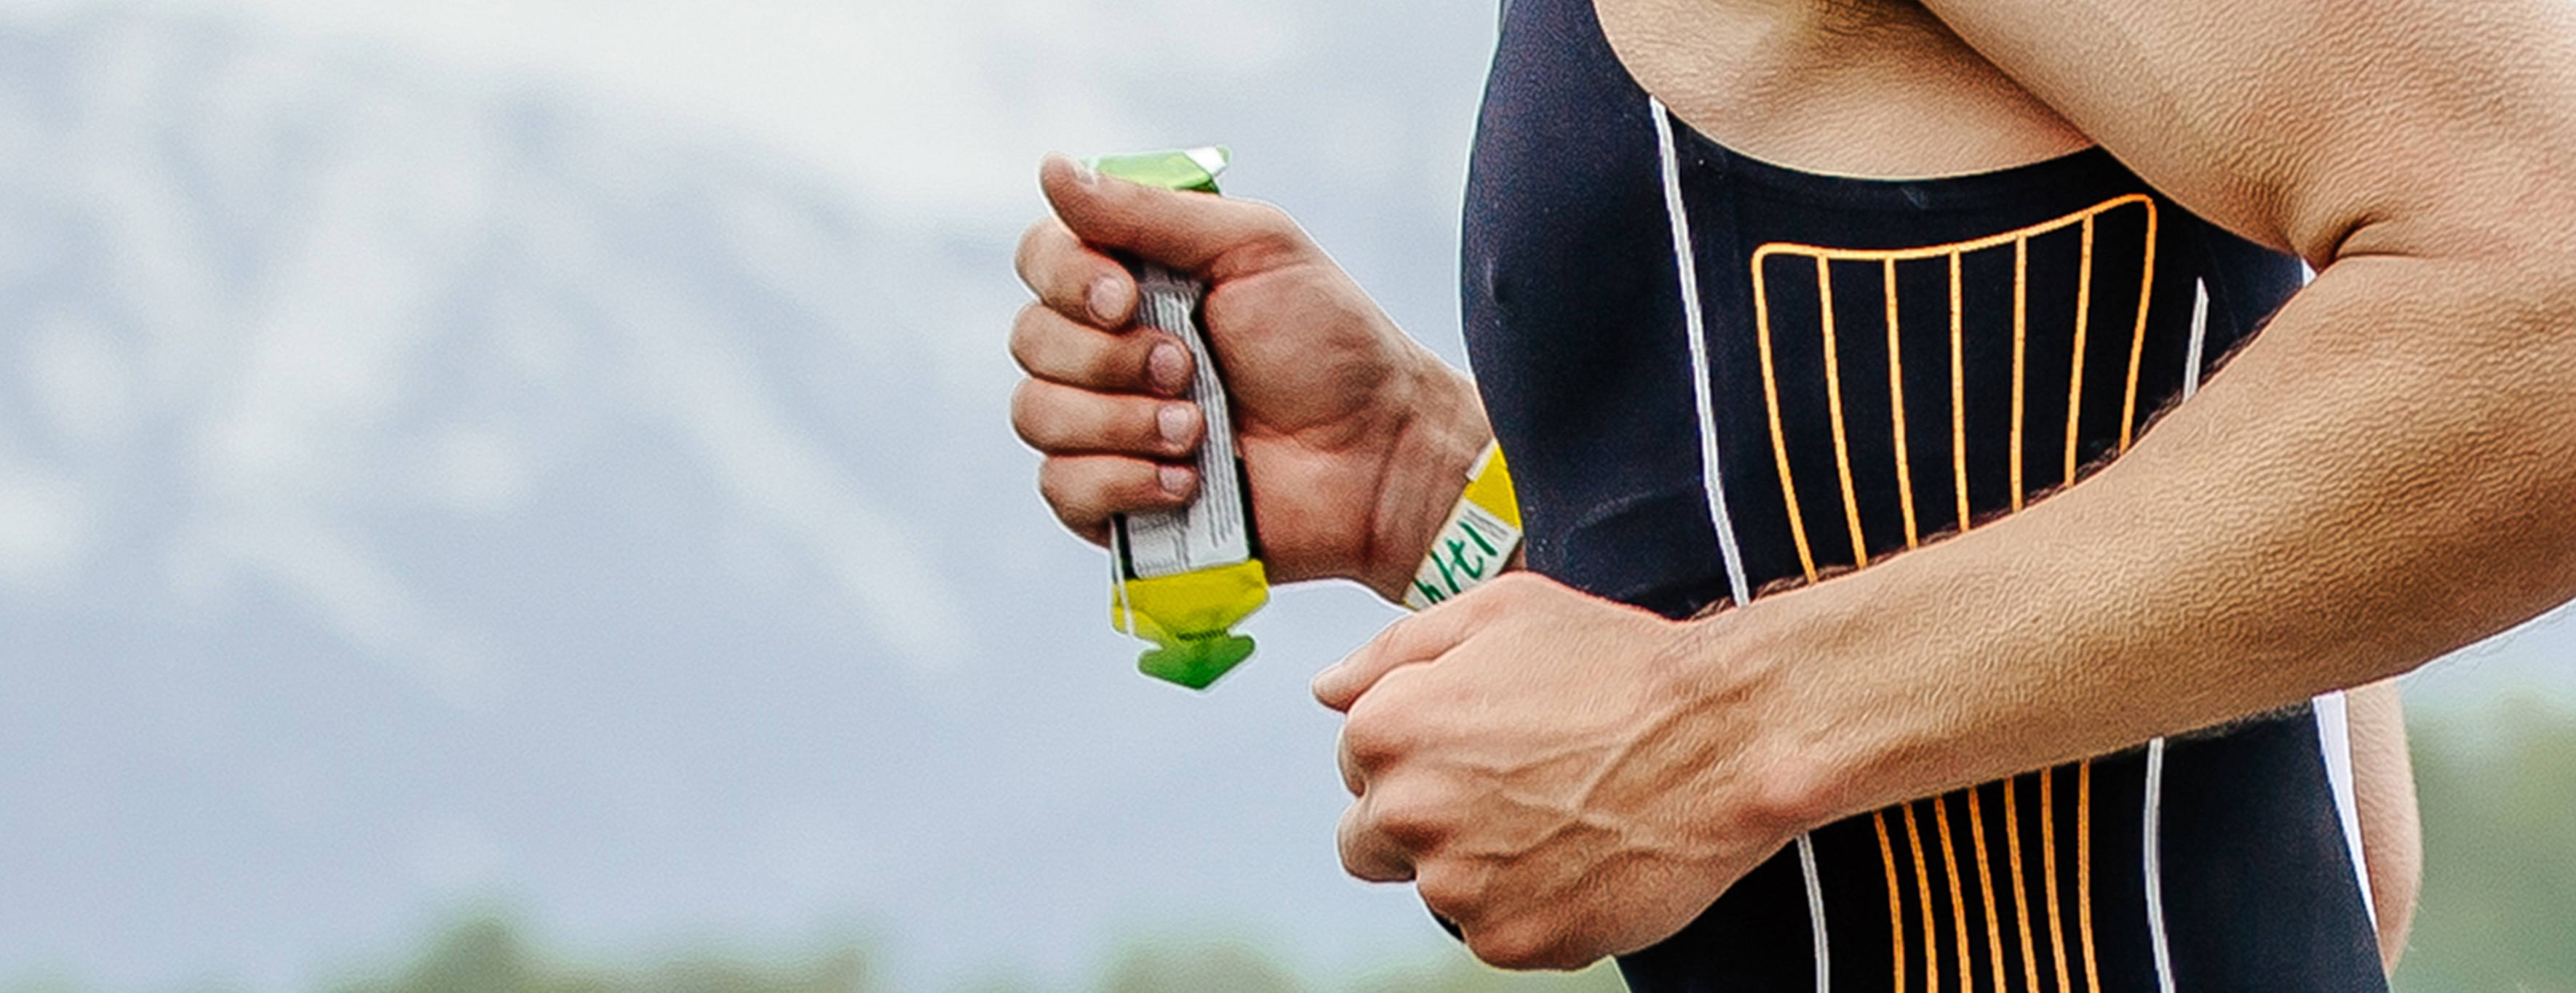 Energy gels and electrolytes - shop now